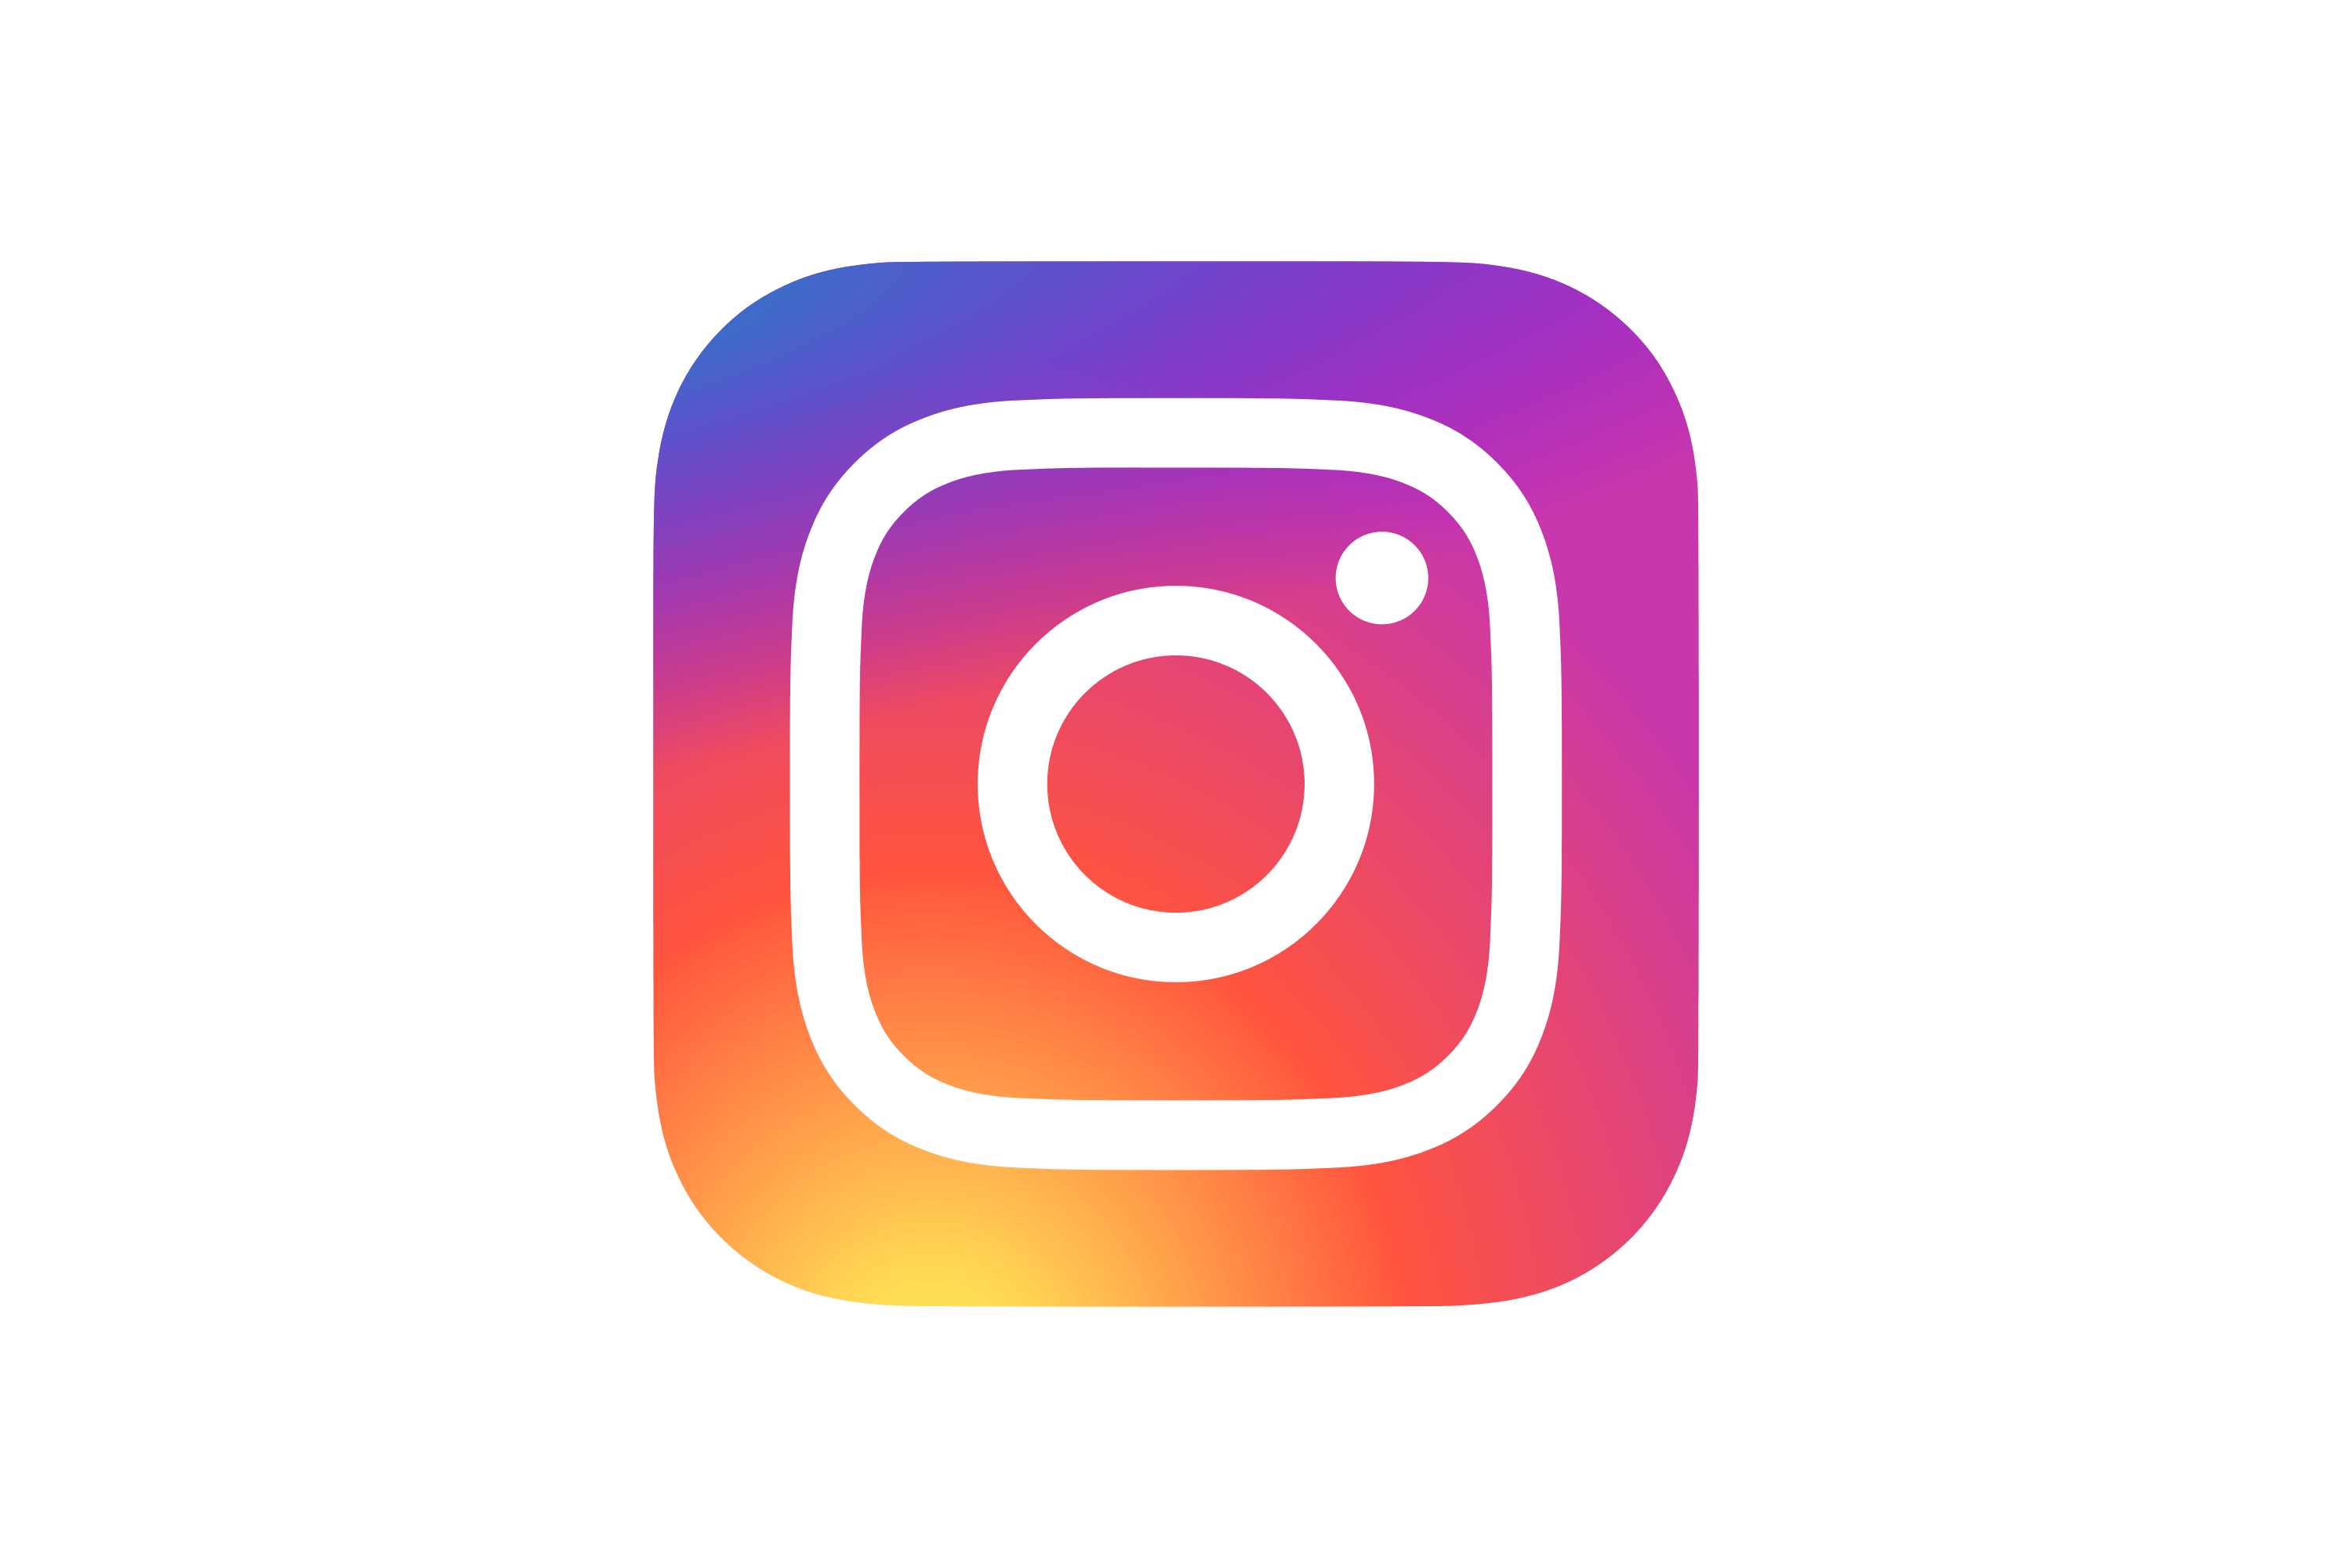 Instagram Downloader On A Budget: Ten Tips From The Great Depression